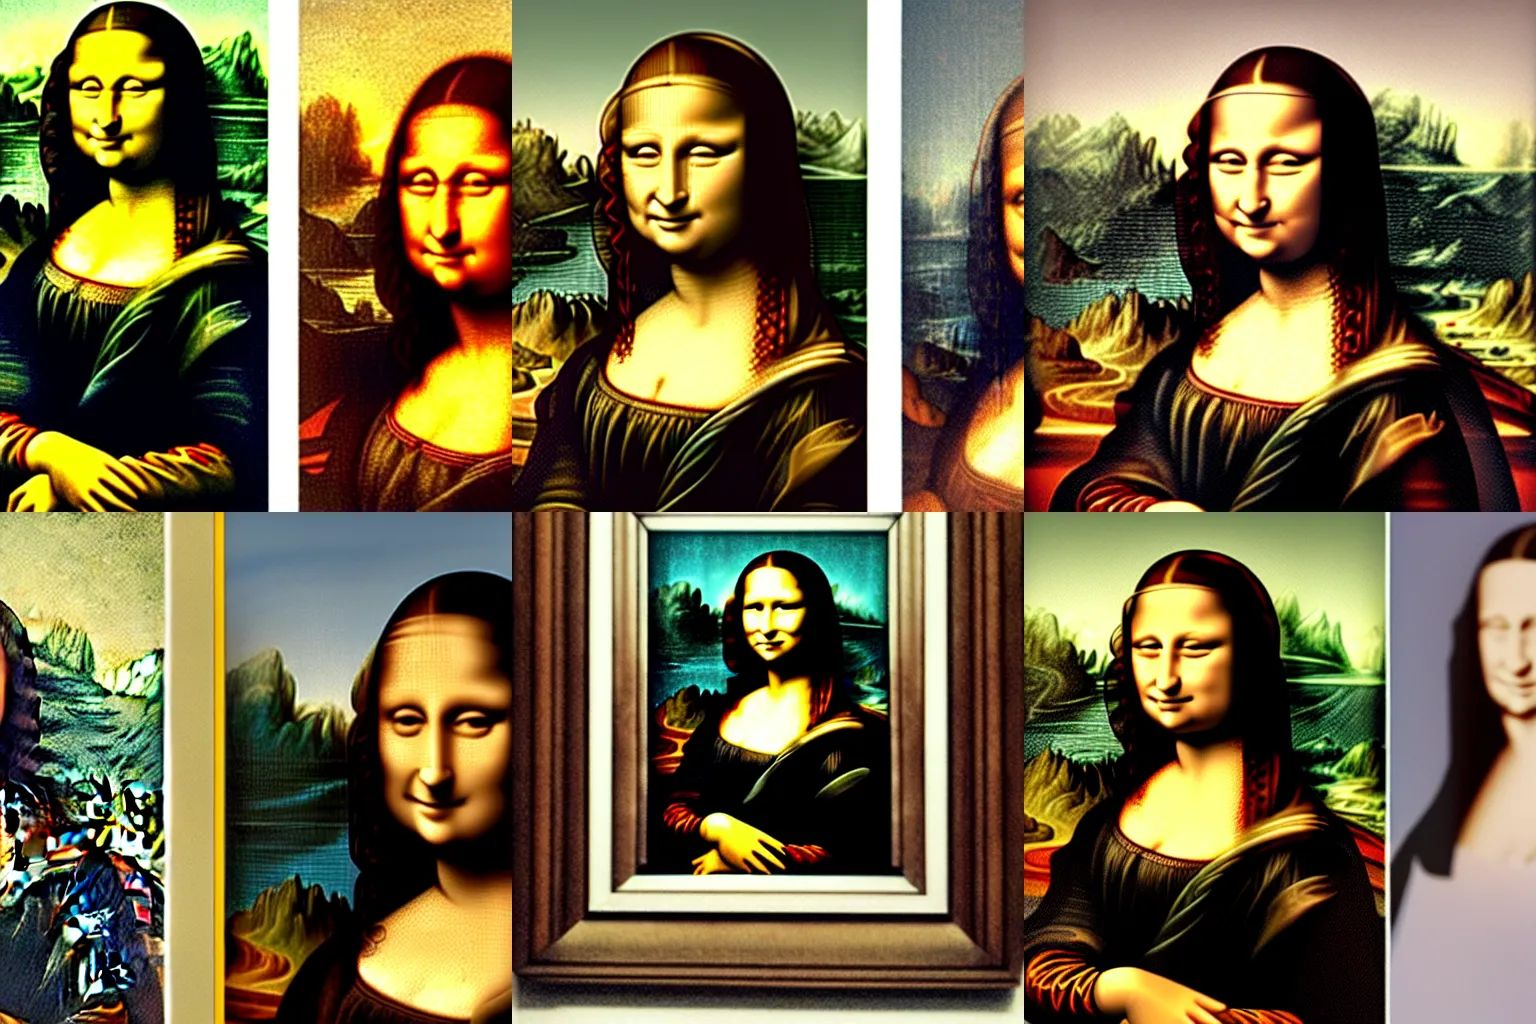 Prompt: Photo of an uncanny resemblance between the Mona Lisa and her own image, circa 1600